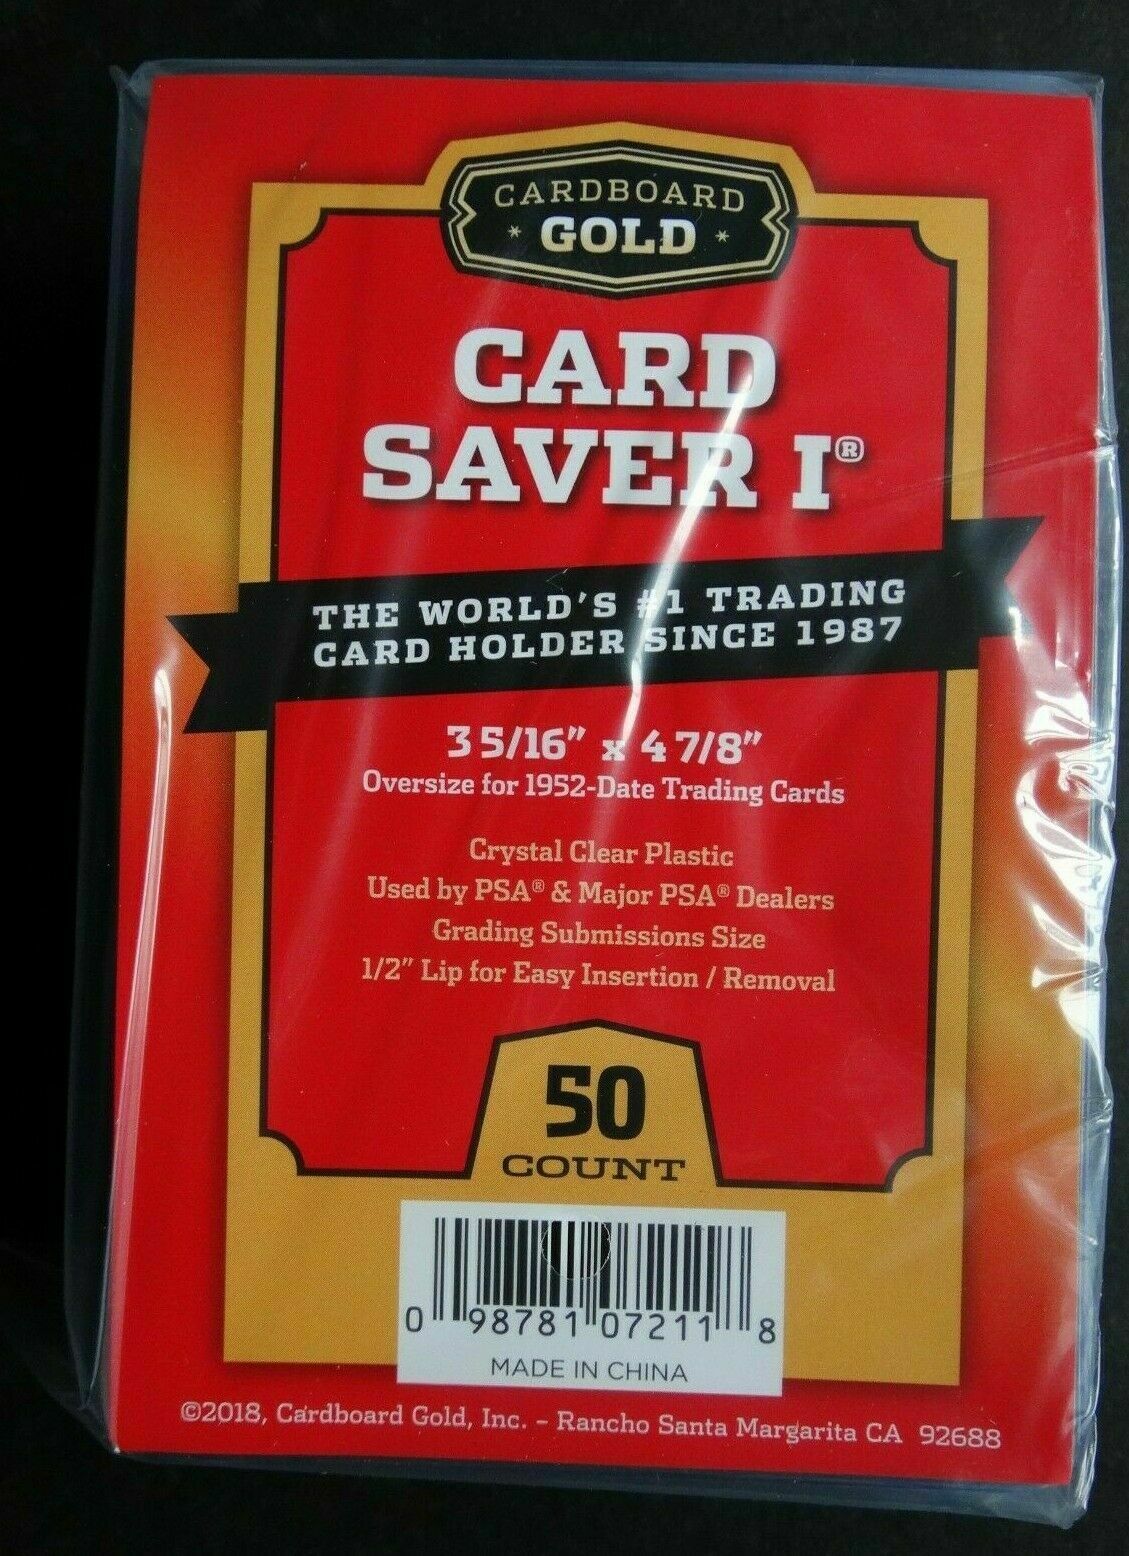 Perfect Fit Sleeves for Card Saver 1